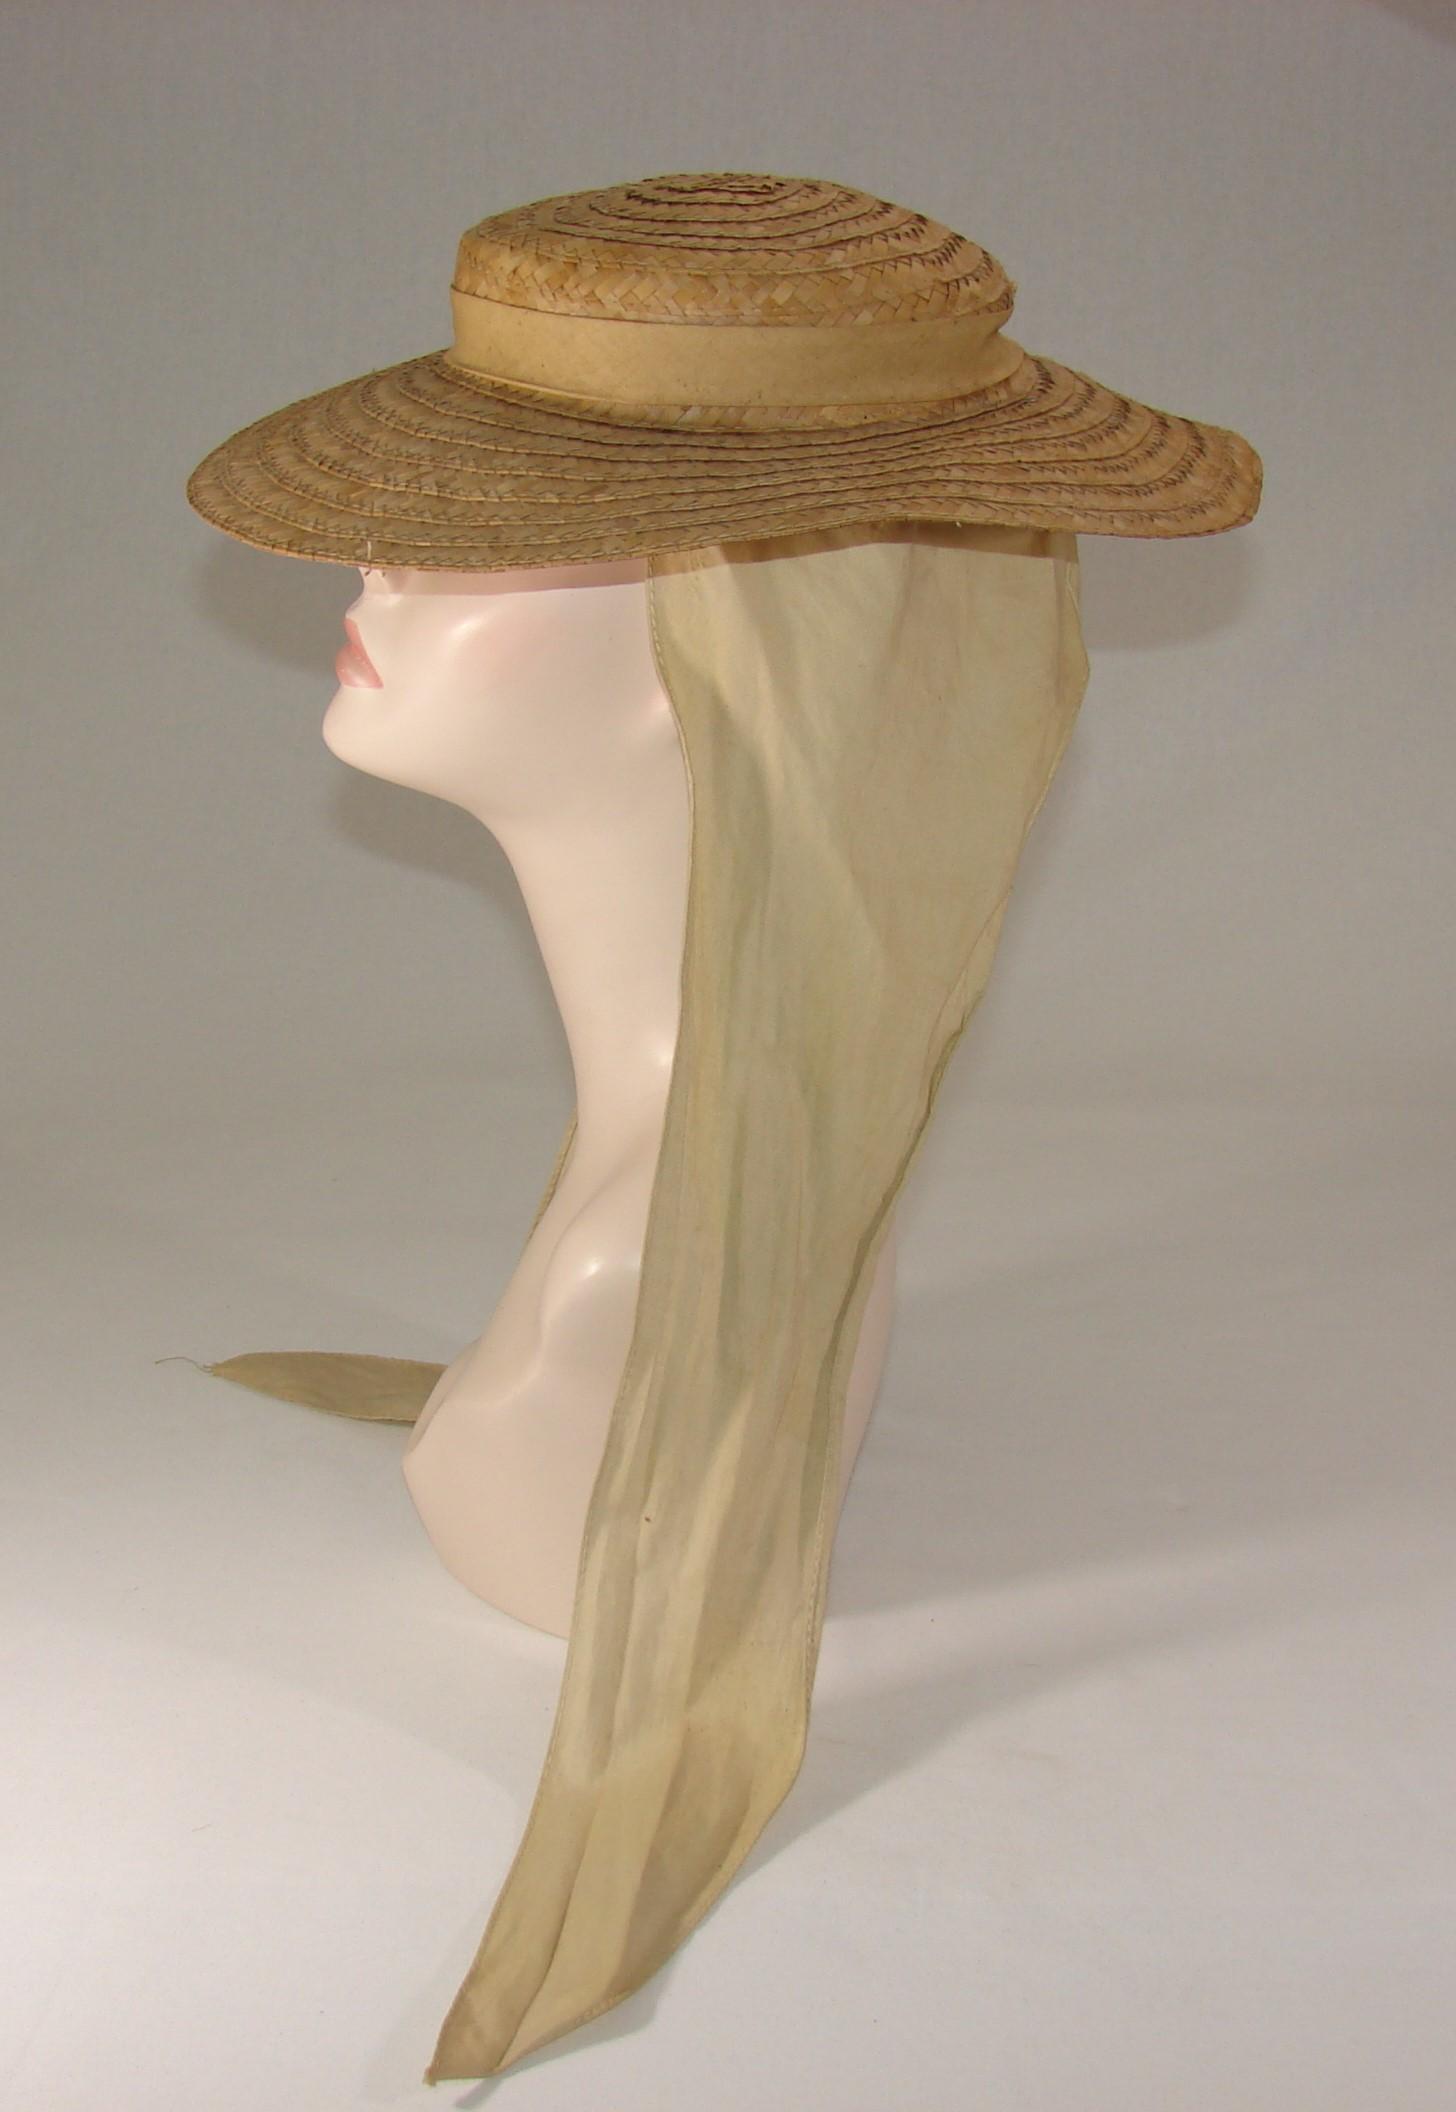 Edwardian Ladies Sporting Hat Or Bonnet In Natural Straw